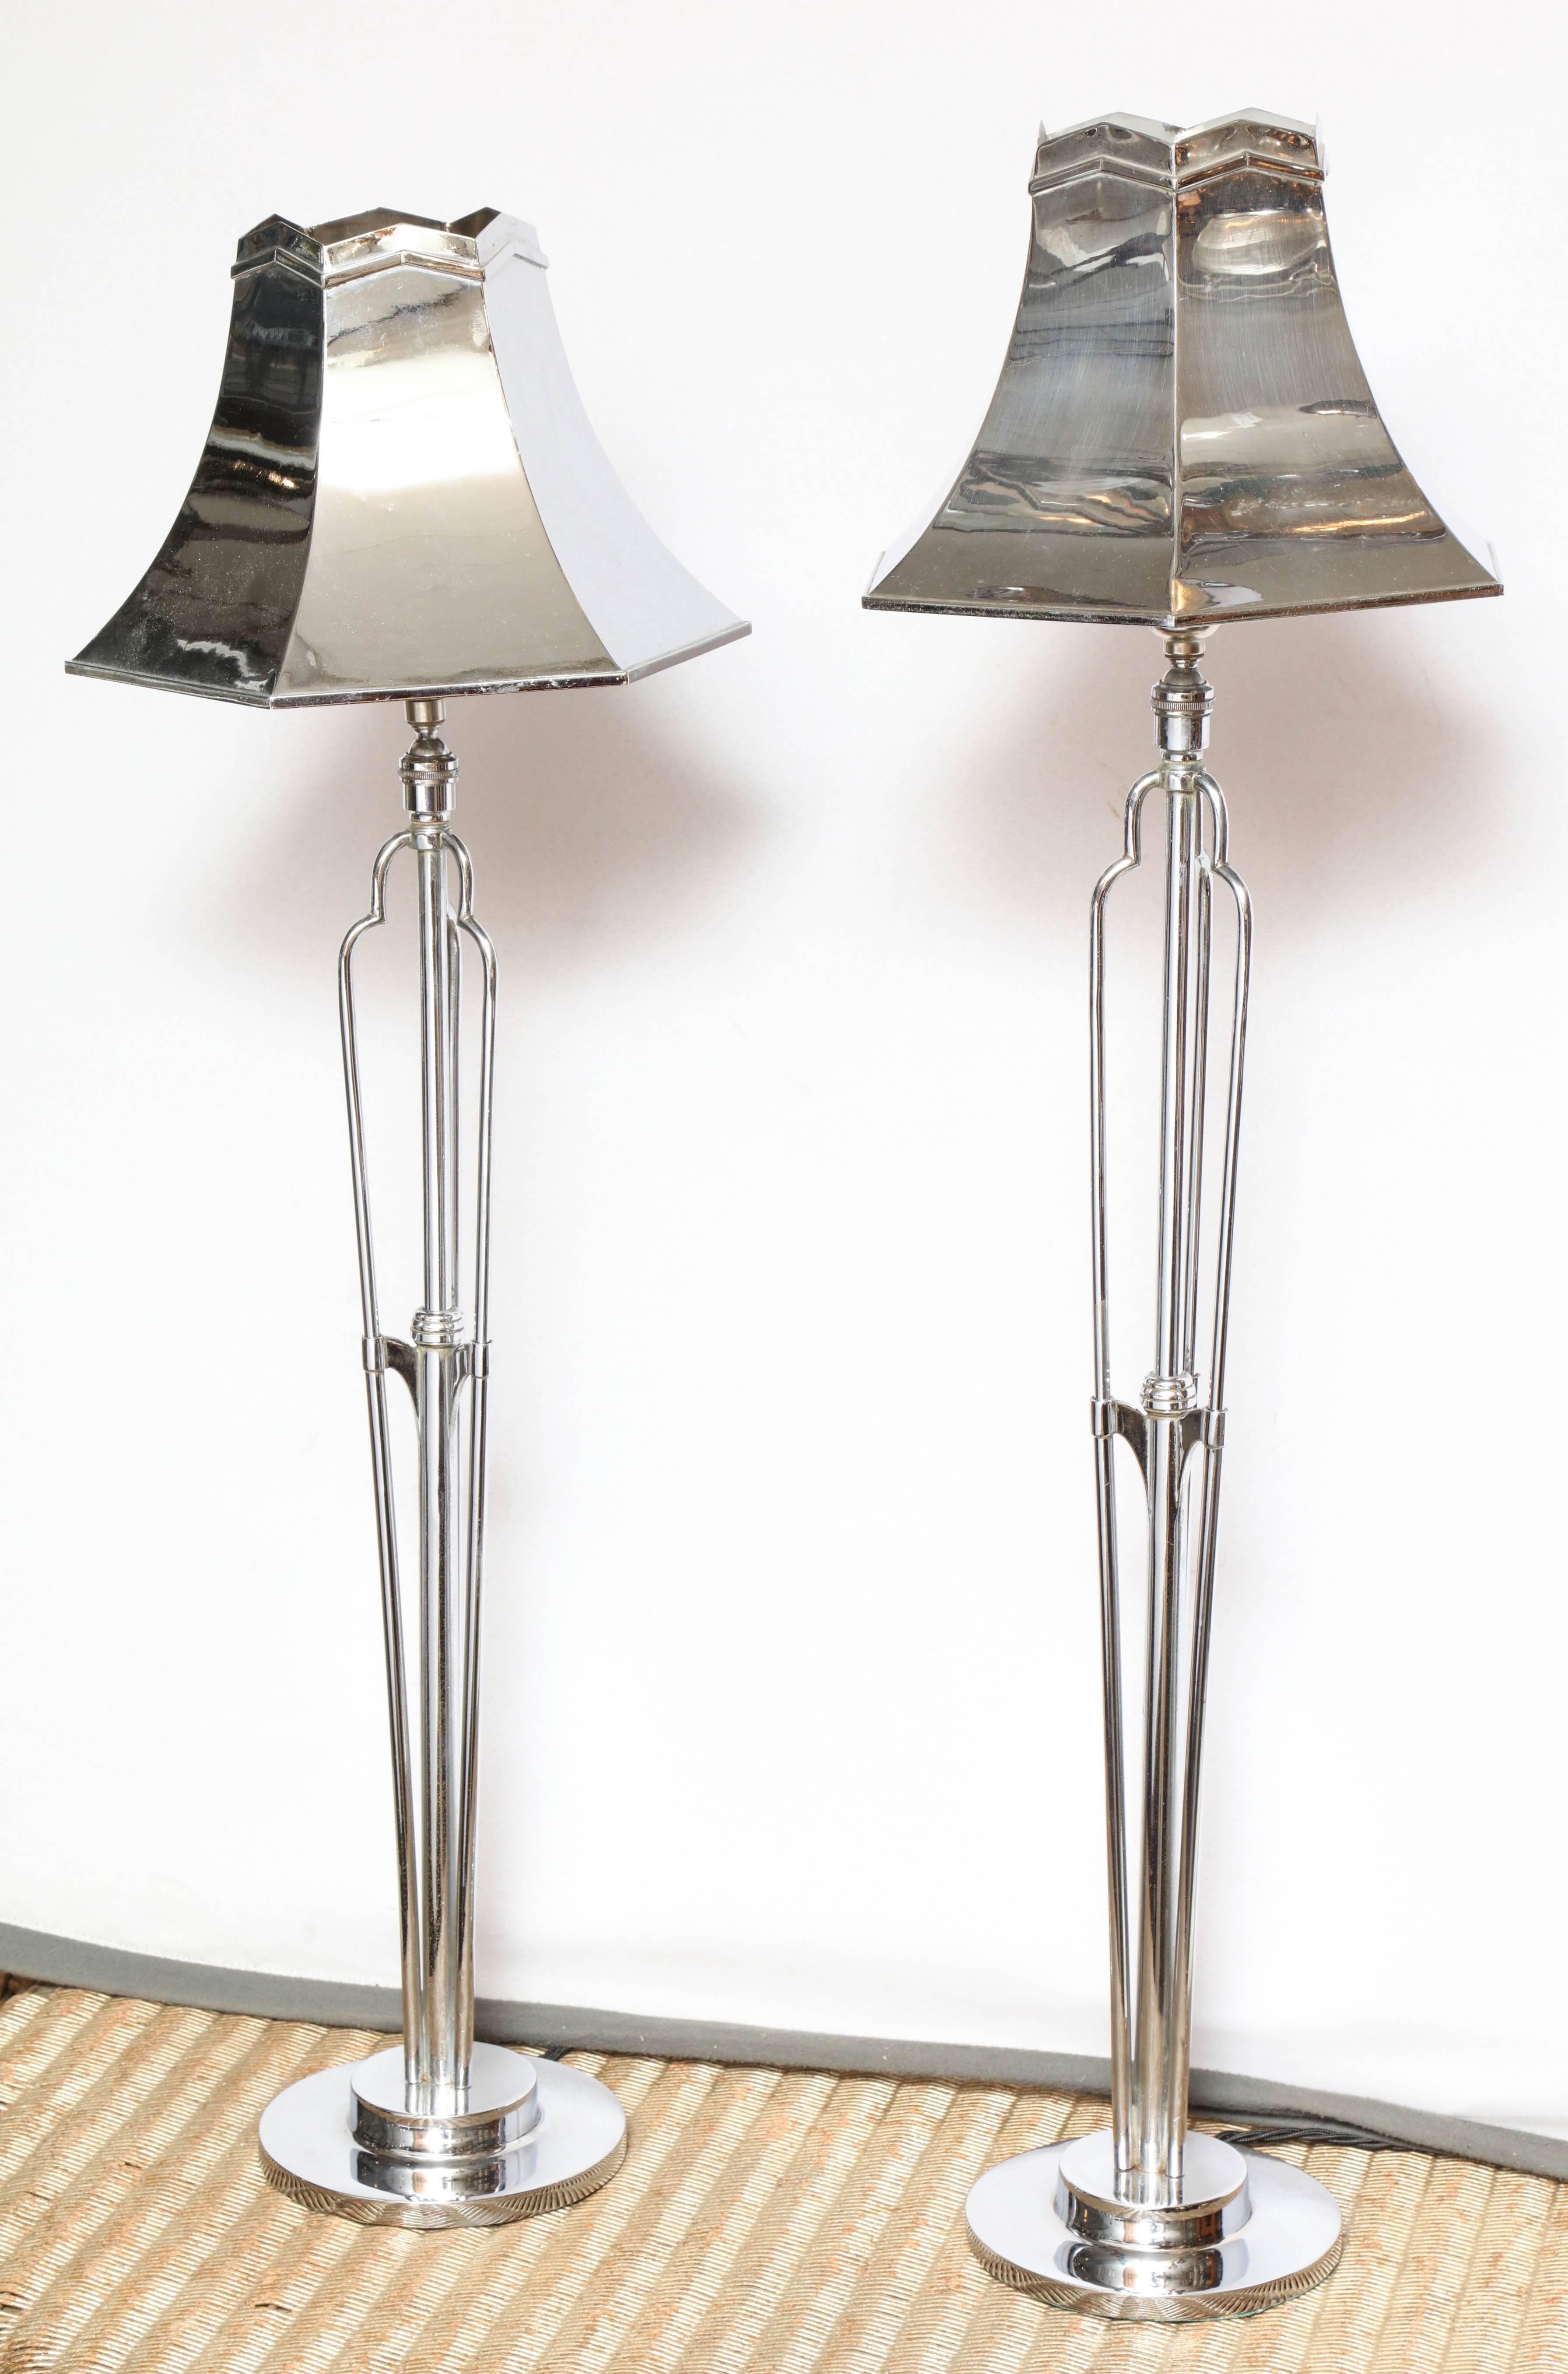 Pair of lamps from Claridges hotel. Handpicked by Ann-Morris Buyers.

Claridges Hotel, the seat of High Society in London has housed everyone from exiled Royal Families to Movie Stars. The hotel received a makeover of it’s public rooms in 1925